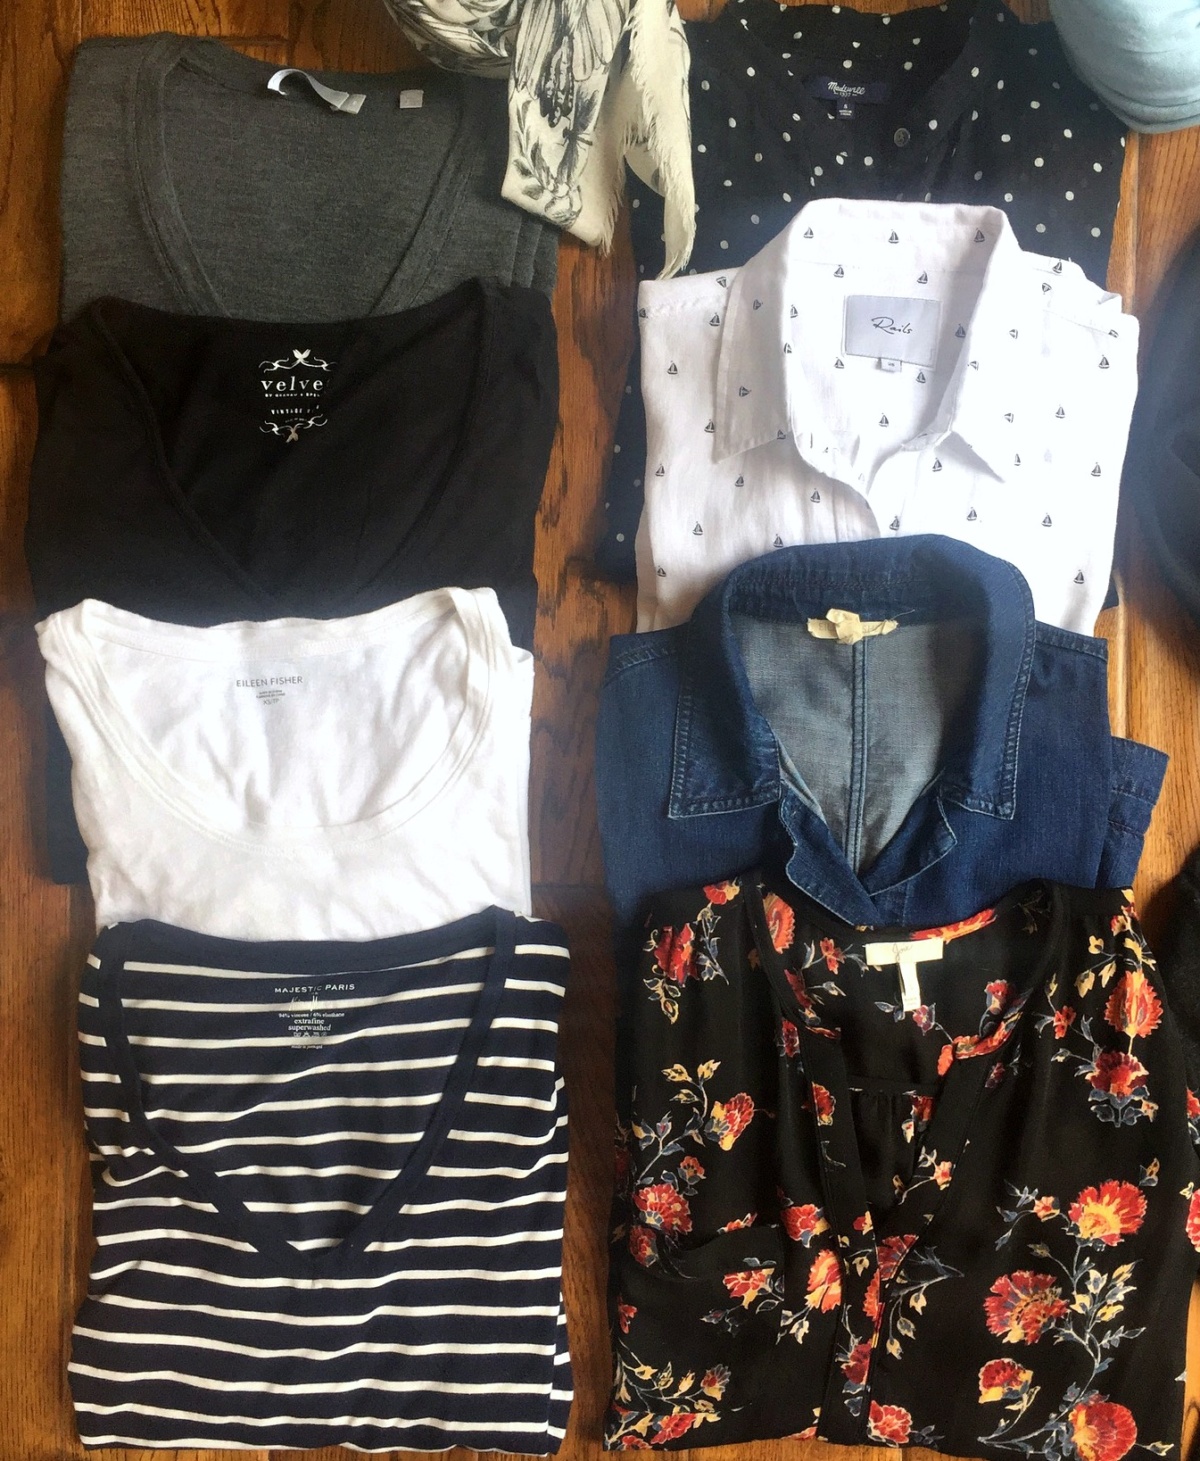 Tops are where I like to add variety in my travel wardrobes. Details at une femme d'un certain age.